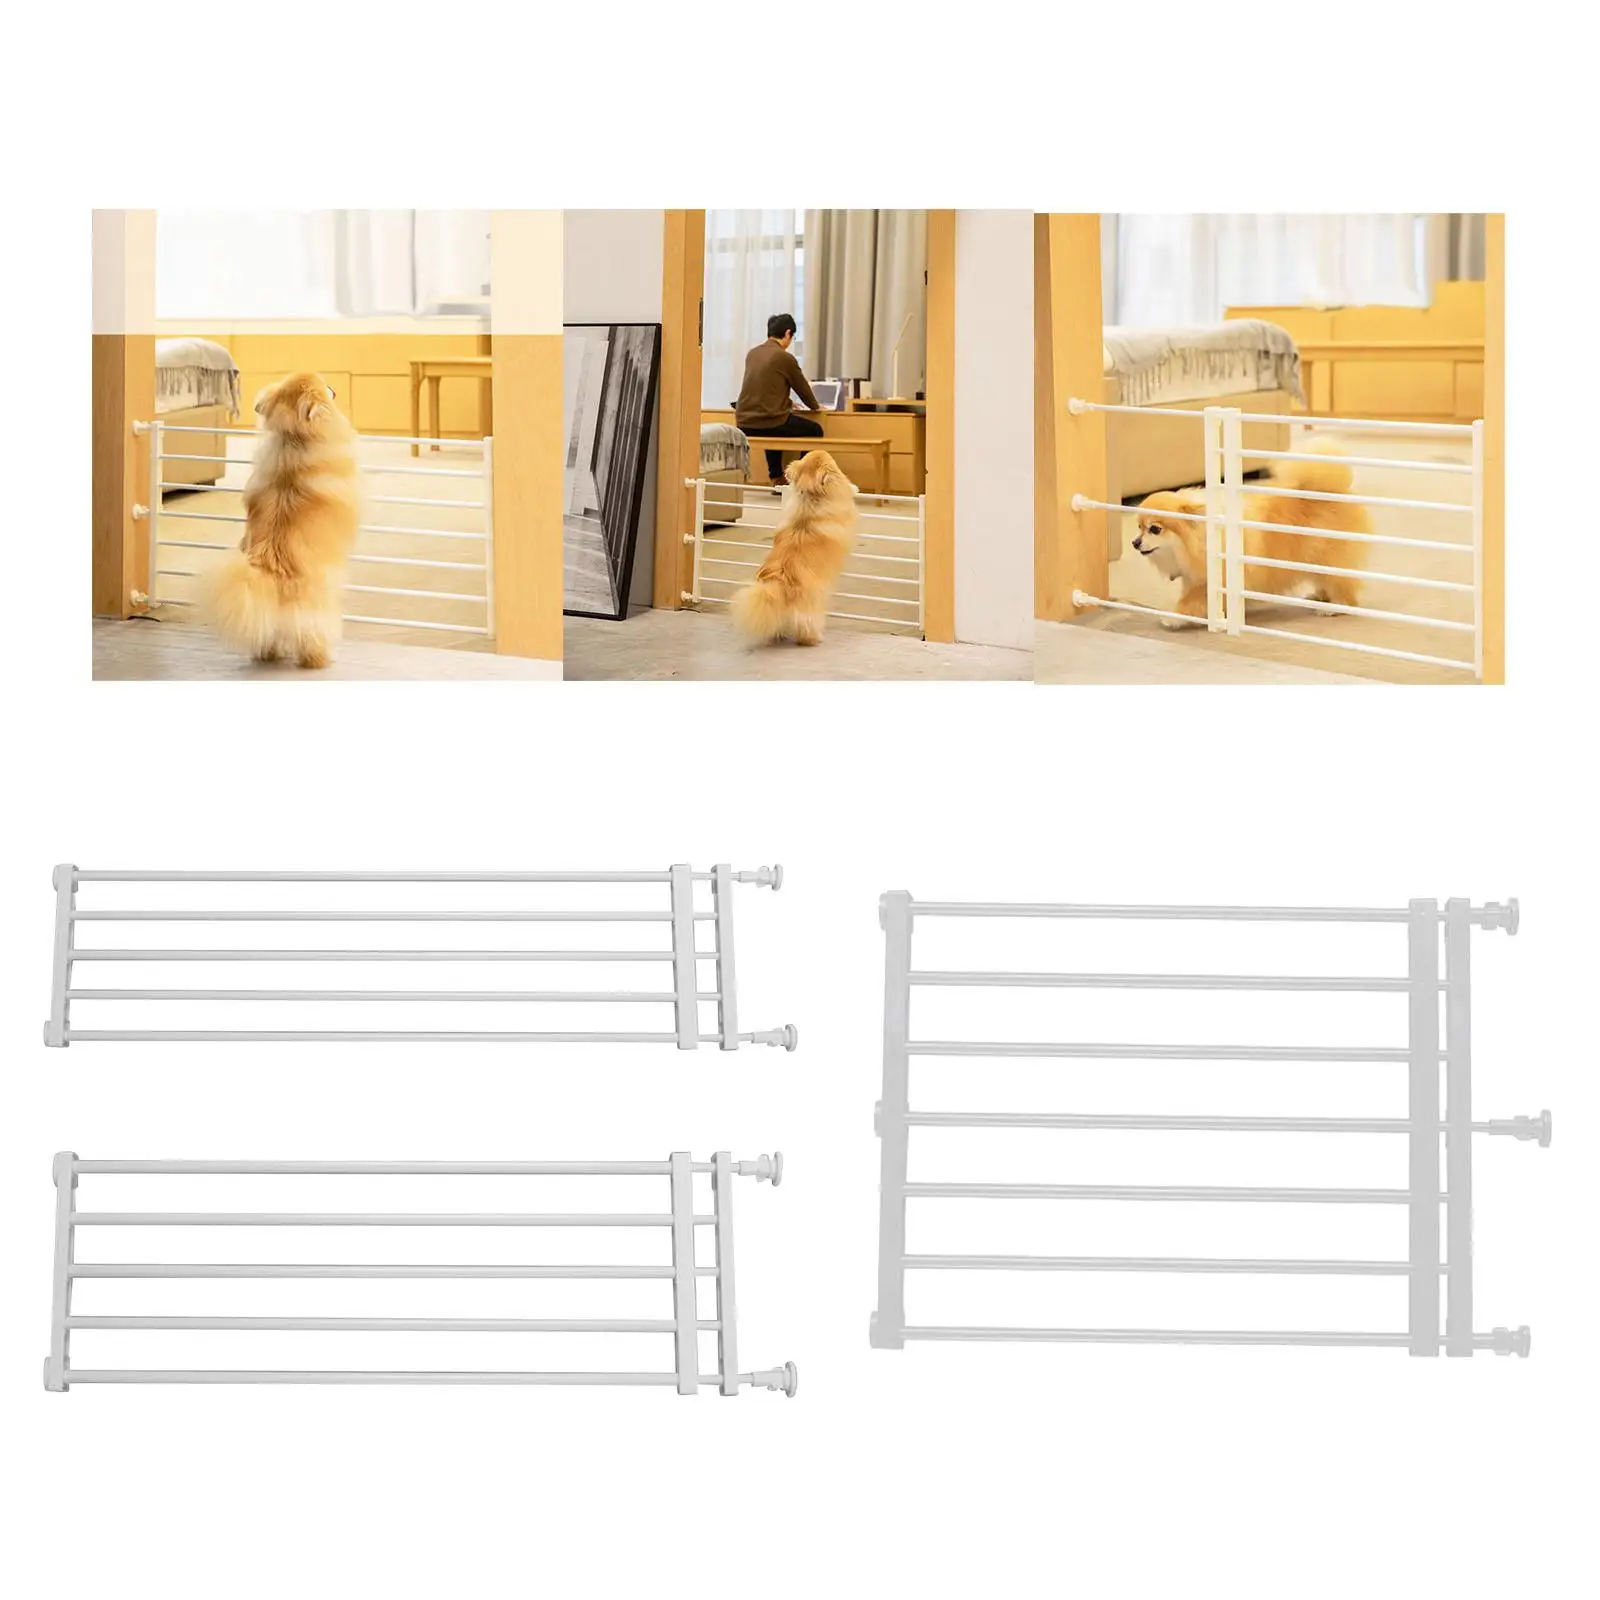 Portable Expandable Dog Gate Stair Gate Adjustable Screen Door Protection Barrier Fence for Patio Lawn Stairs